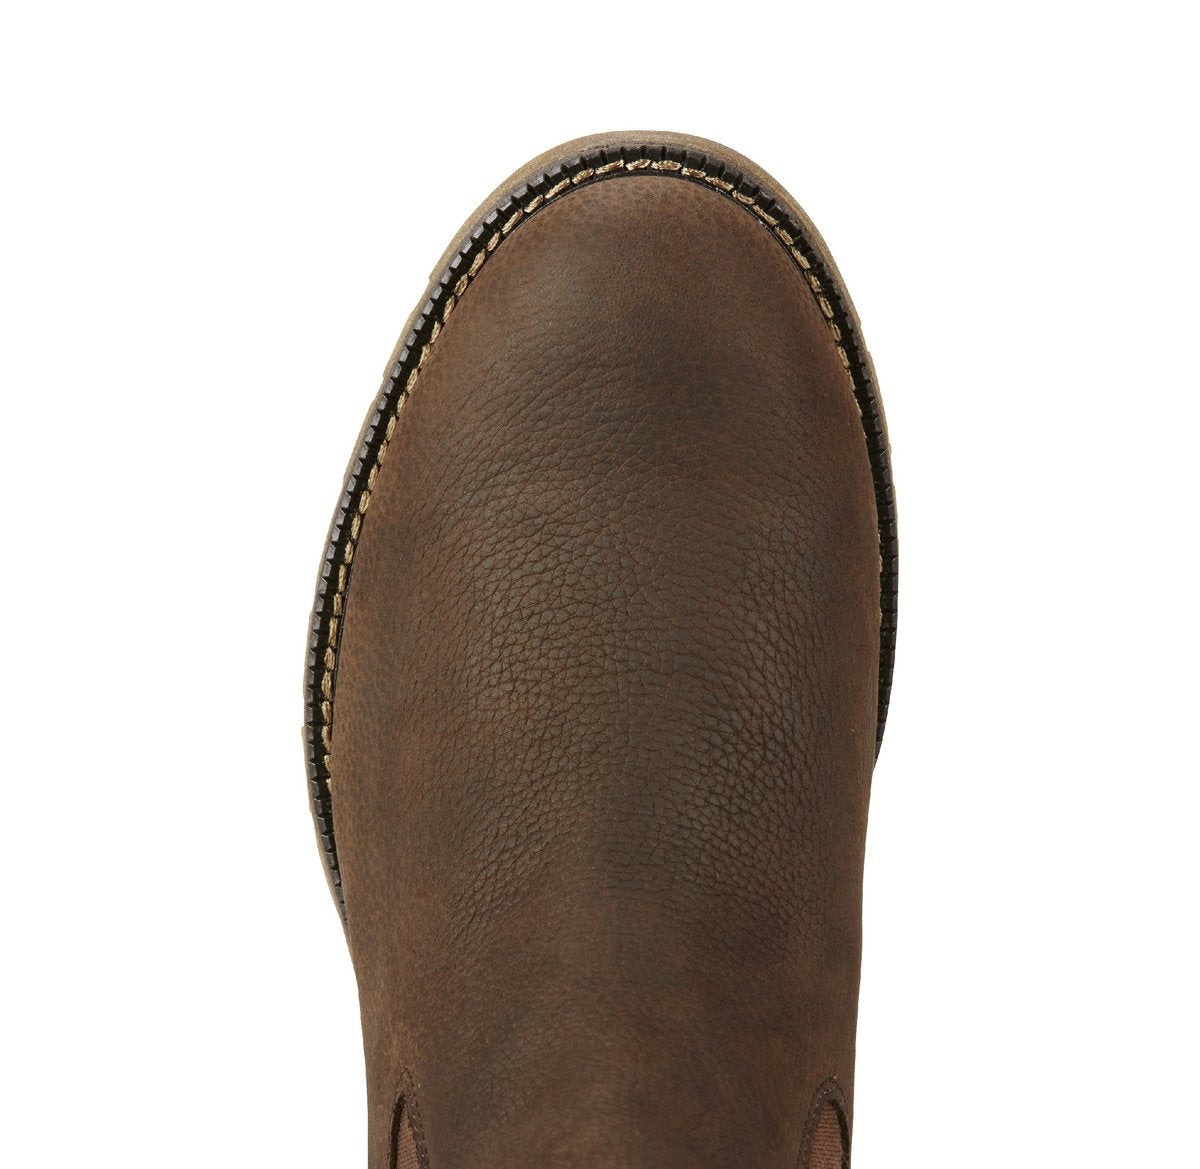 Ariat | Women's Wedxford H2O Java - Outback Traders Australia